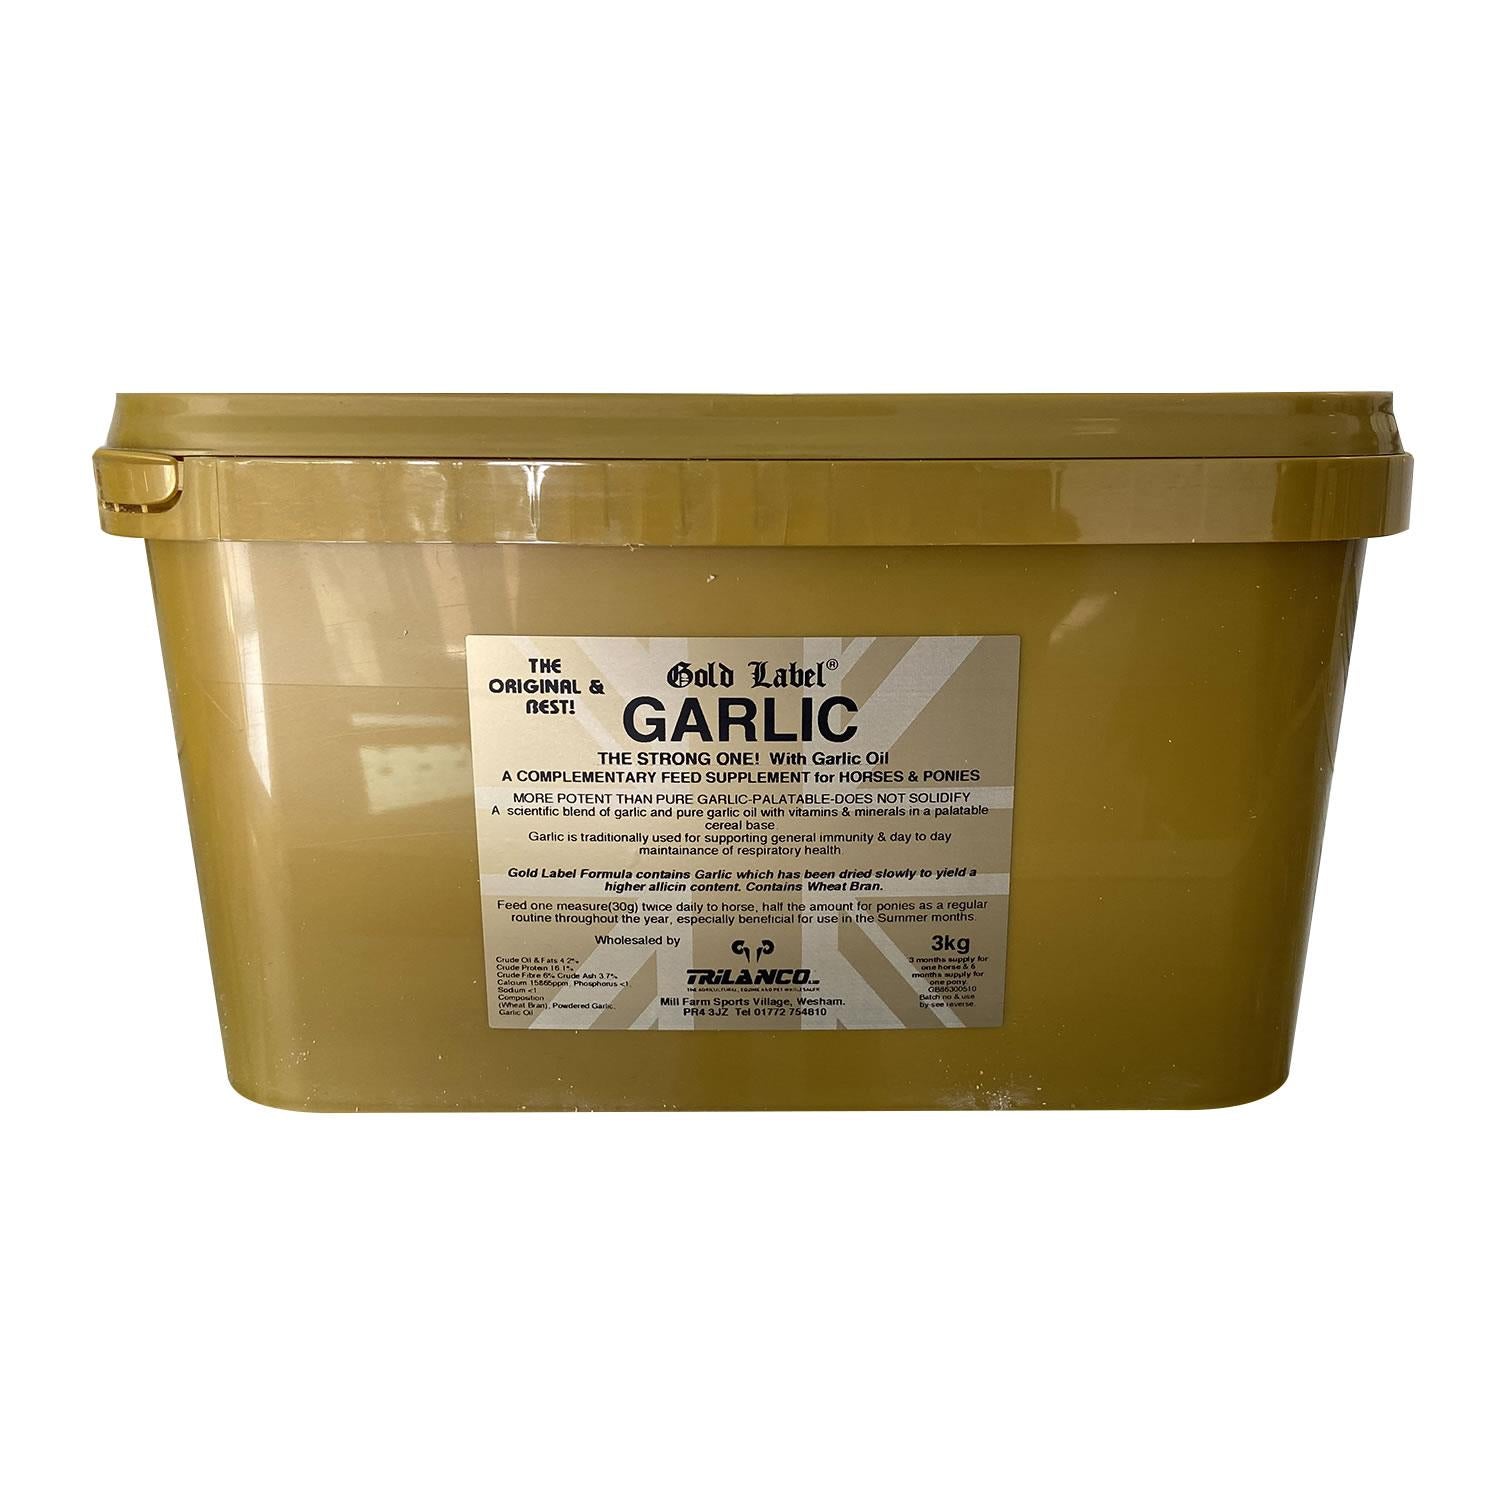 Gold Label Garlic Powder for Horse Respiratory and Skin Health